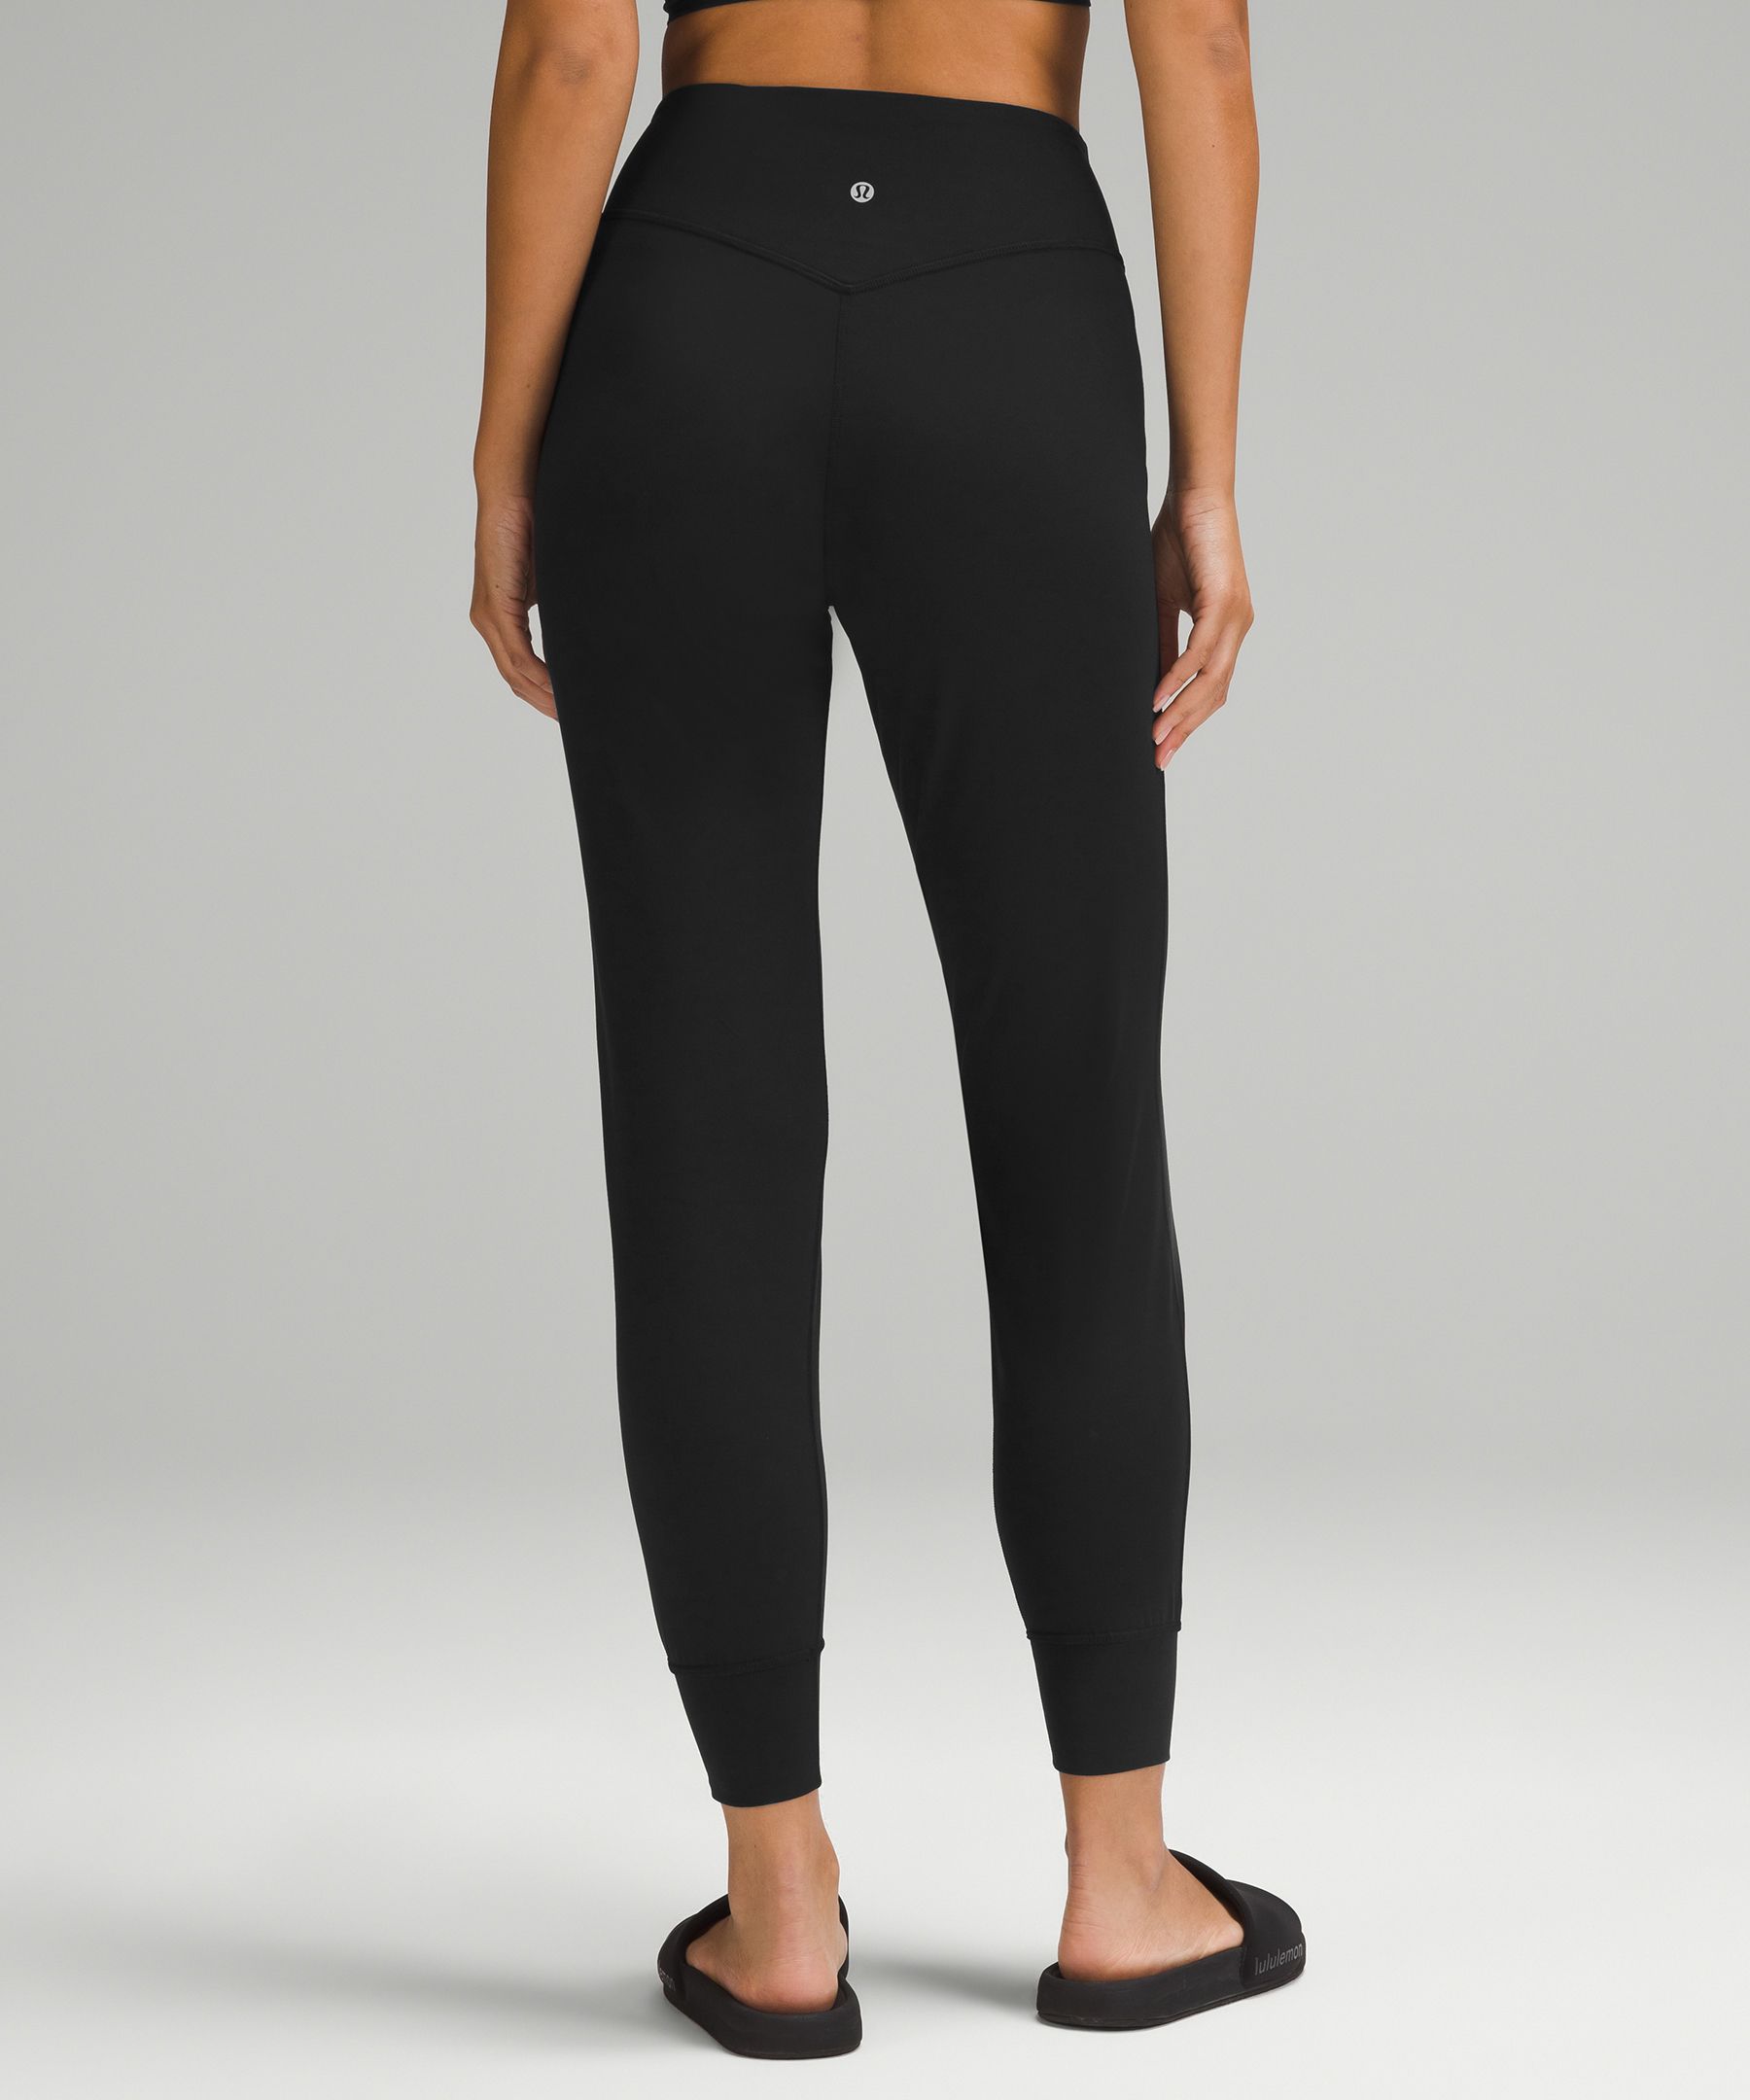 Lululemon NWT Align High-Rise Jogger - Java Size 4 - $111 New With Tags -  From A